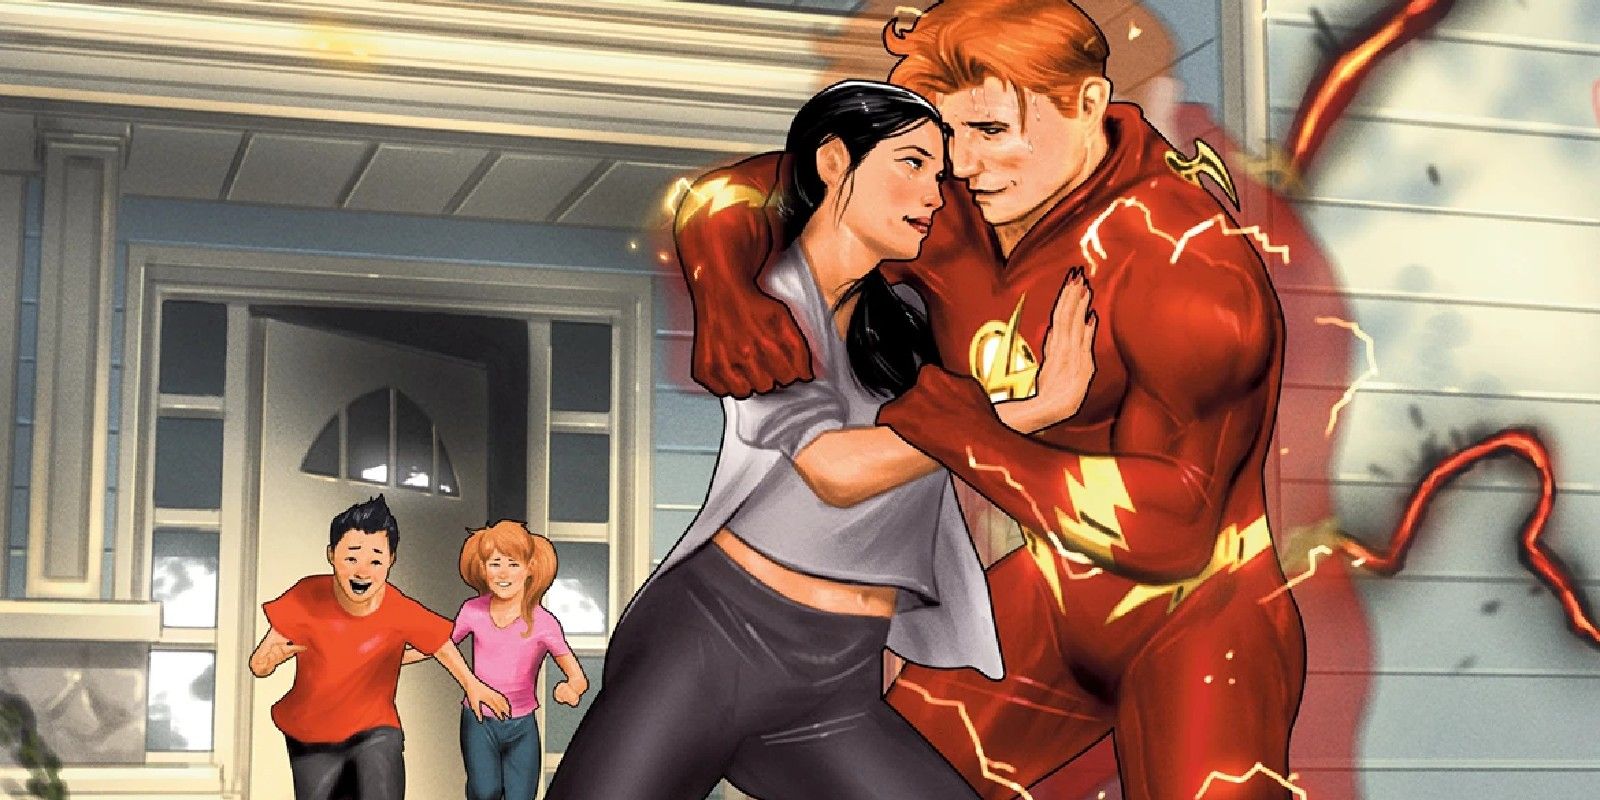 Flash Wally West Hugging Linda Park with Kids in Background